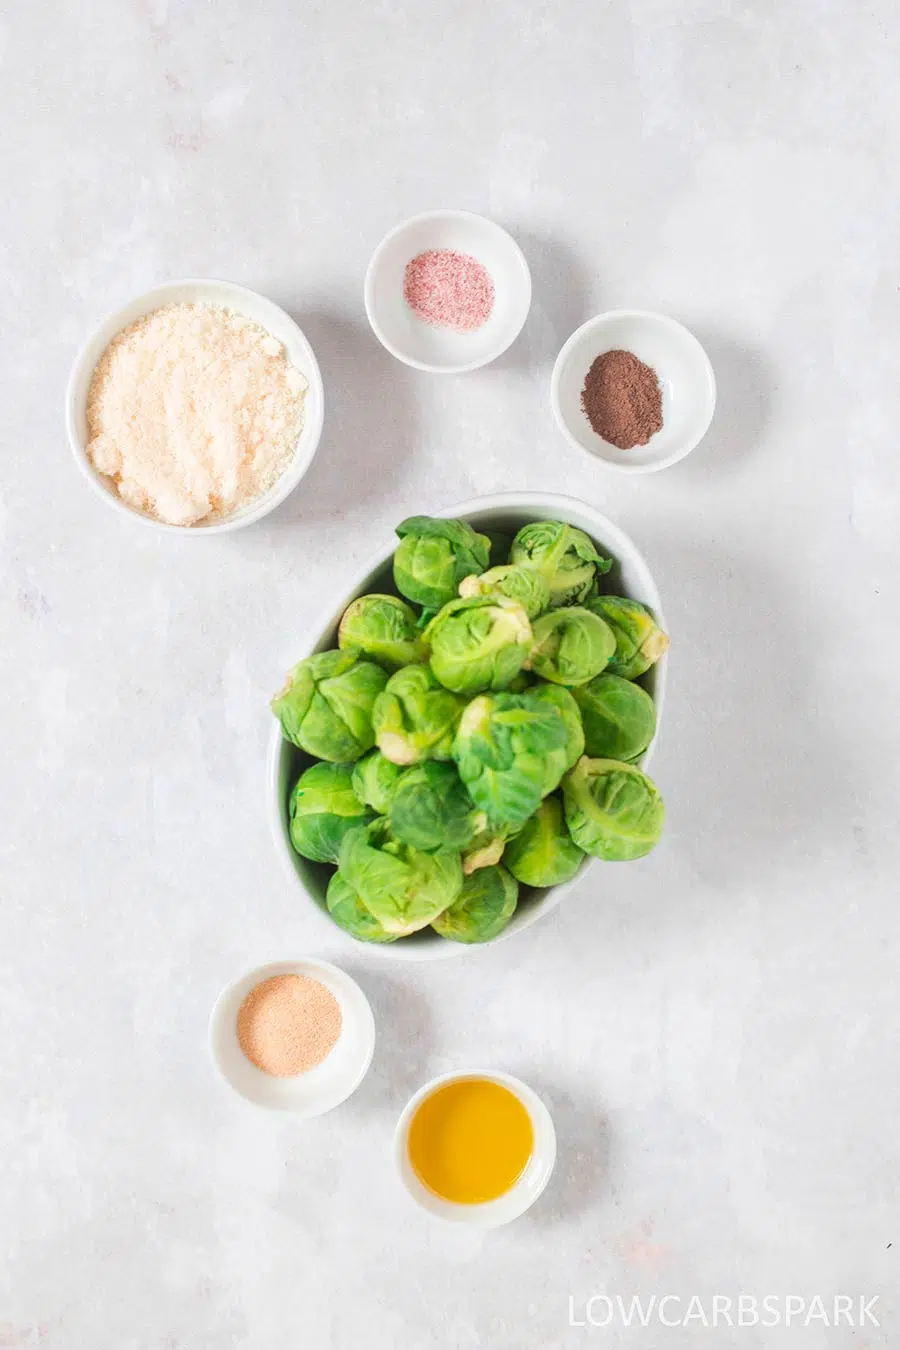 Crispy Smashed Brussels Sprouts Ingredients